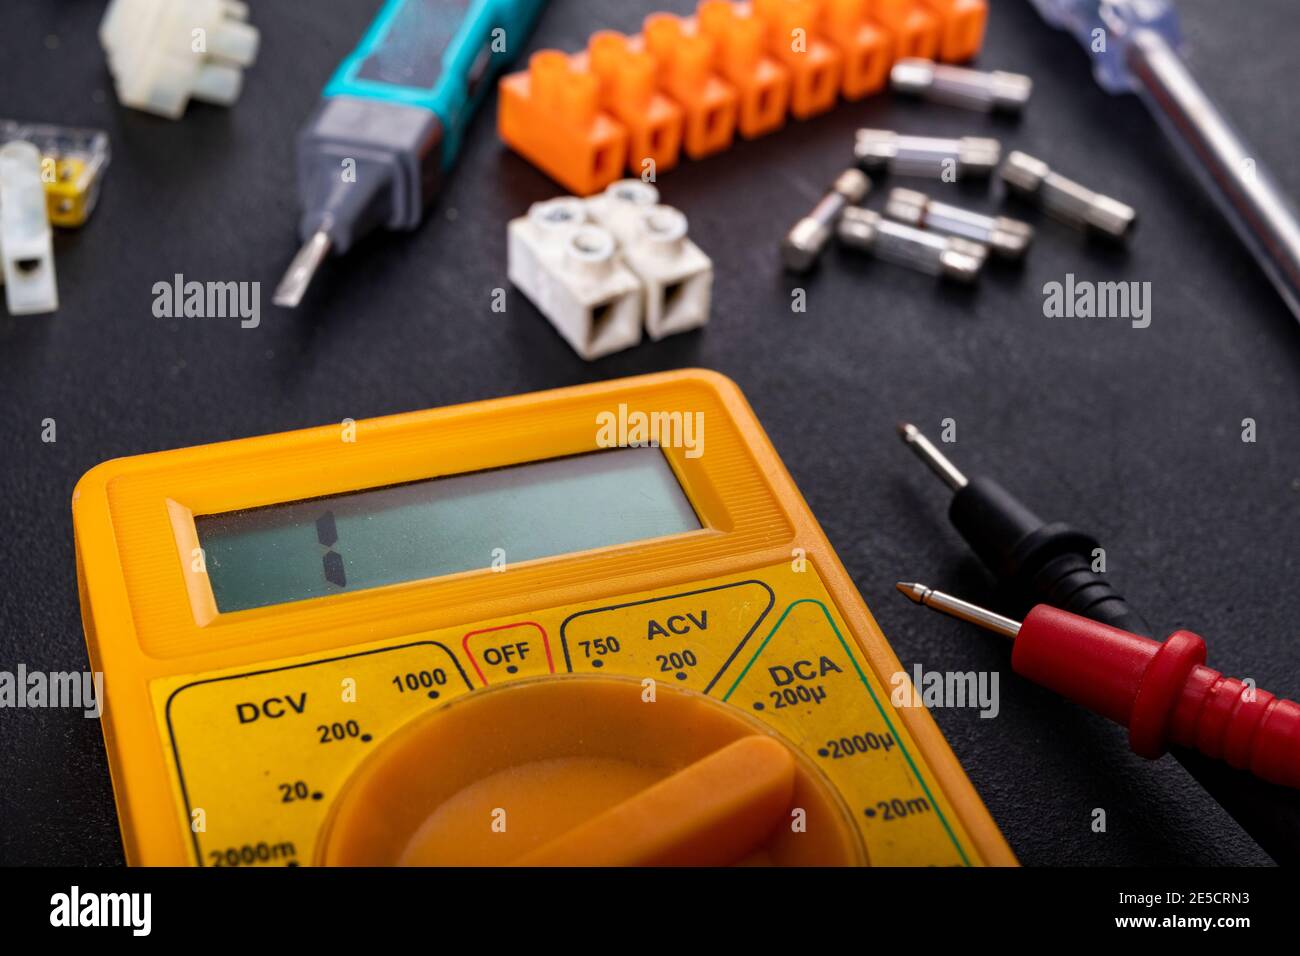 A meter for electrical measurements on a workbench. Accessories for repair and installation of electrical equipment. Dark background. Stock Photo